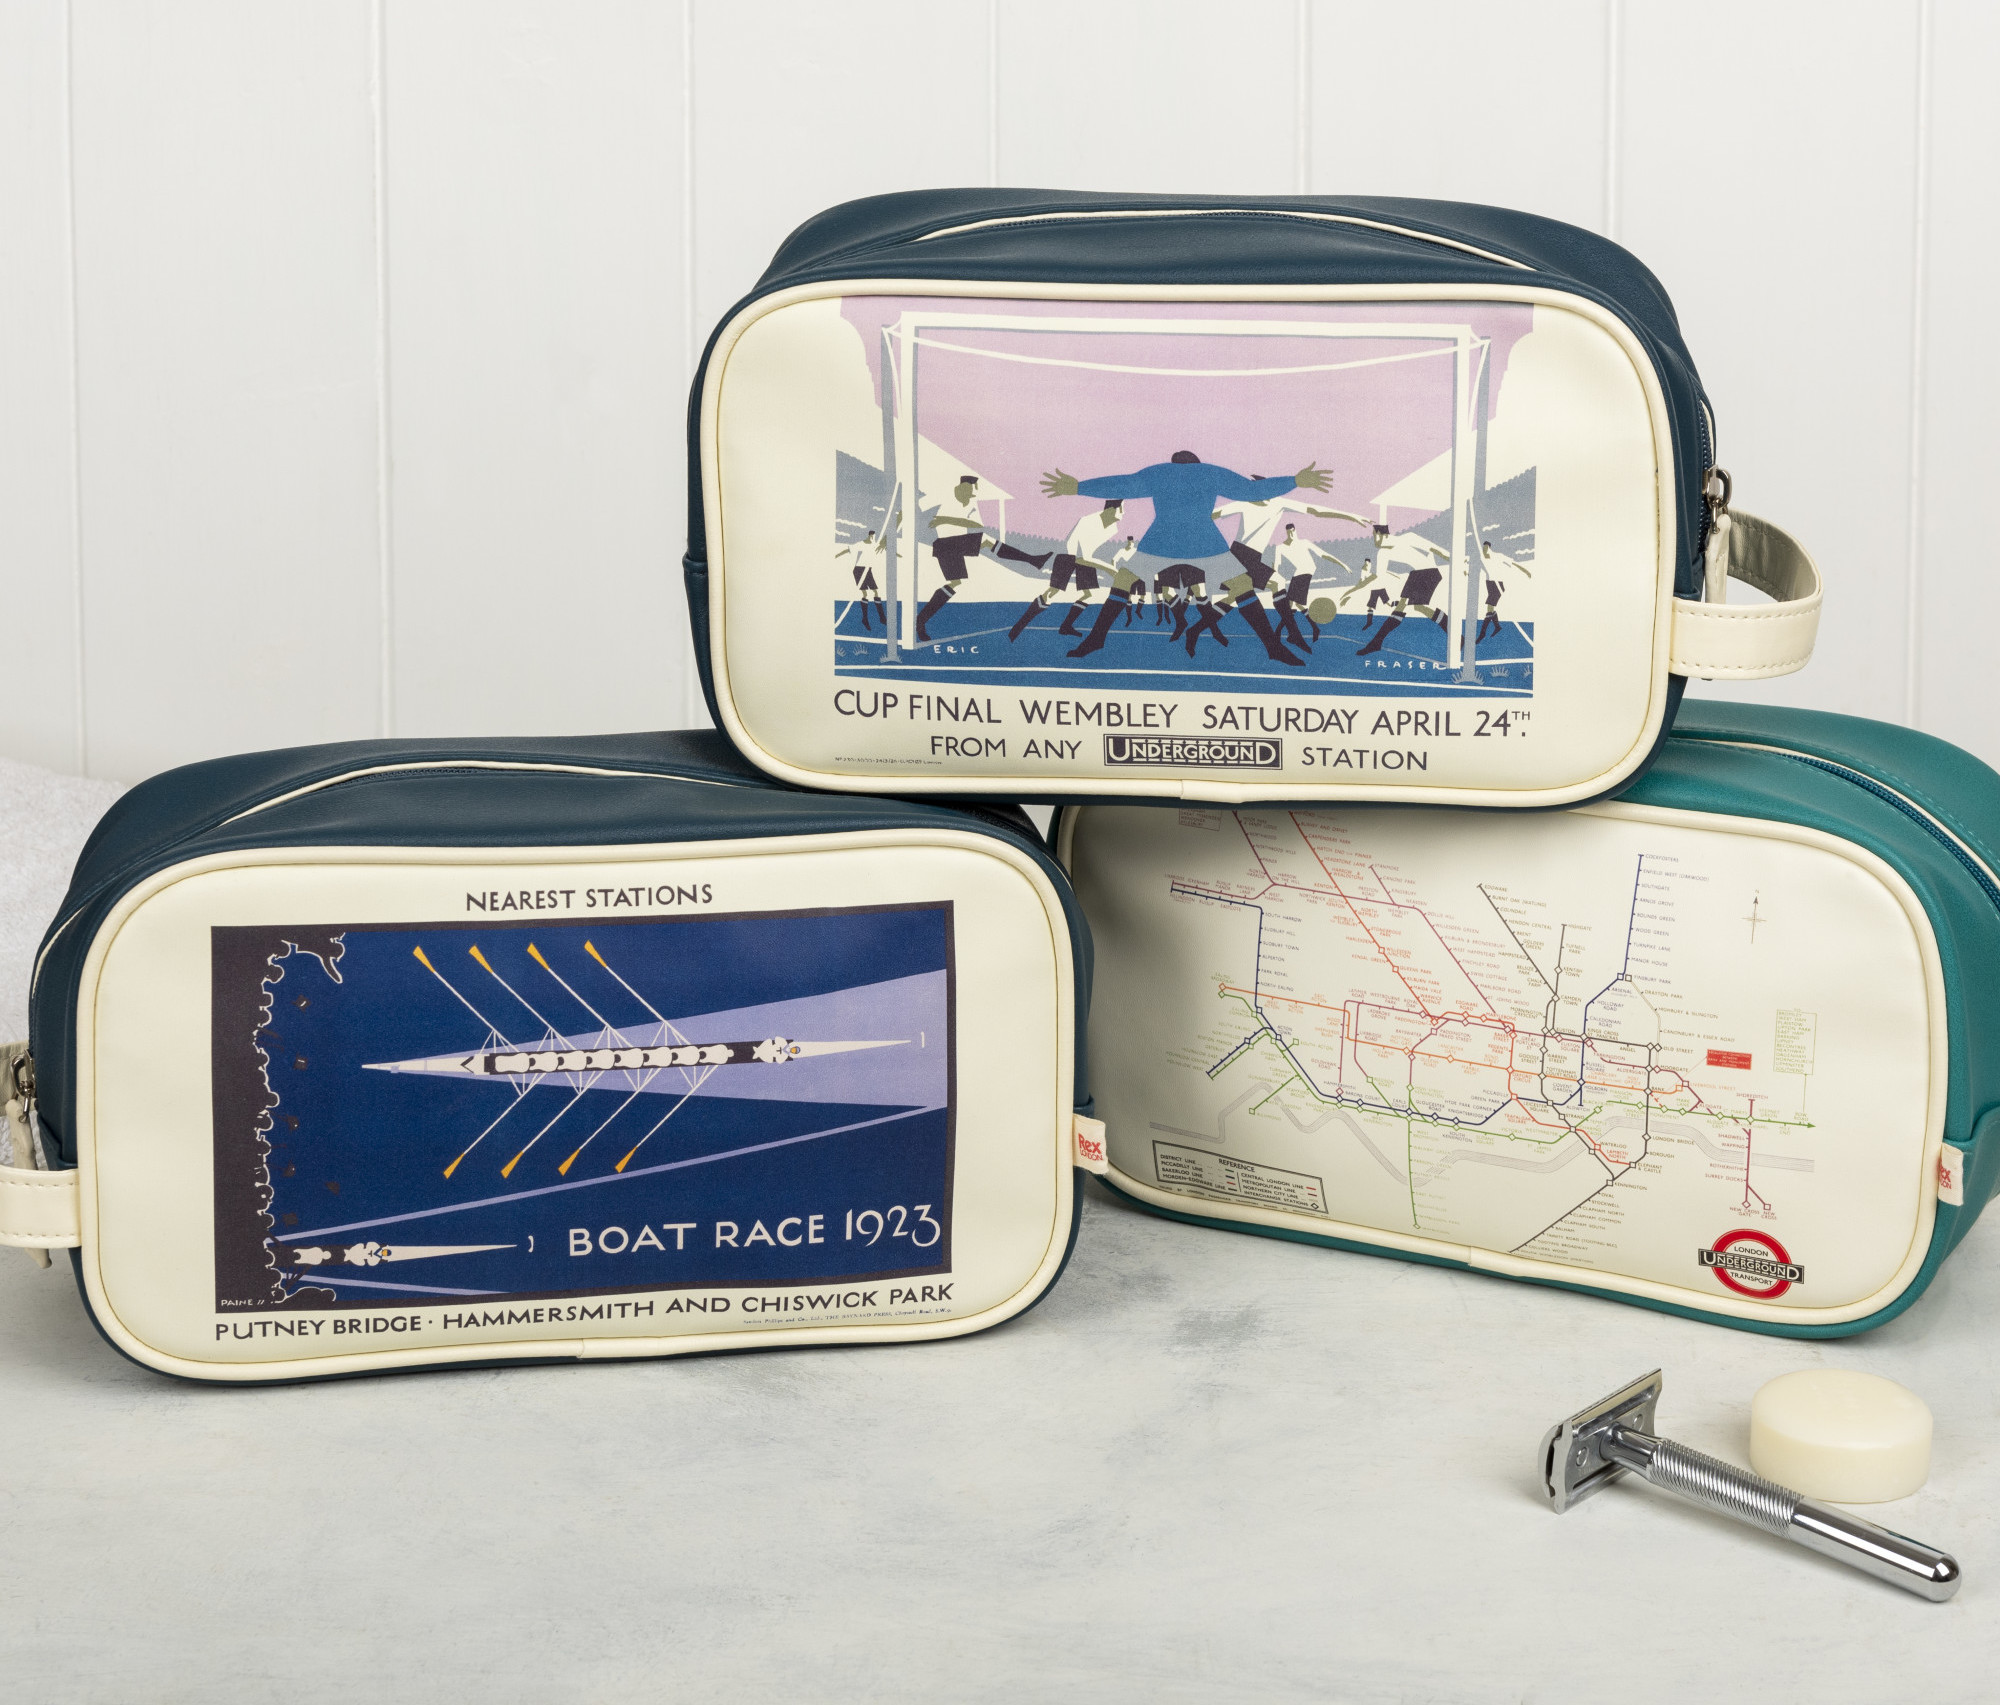 Above: A trio of wash bags feature the Boat Race, Cup Final and London tube map.